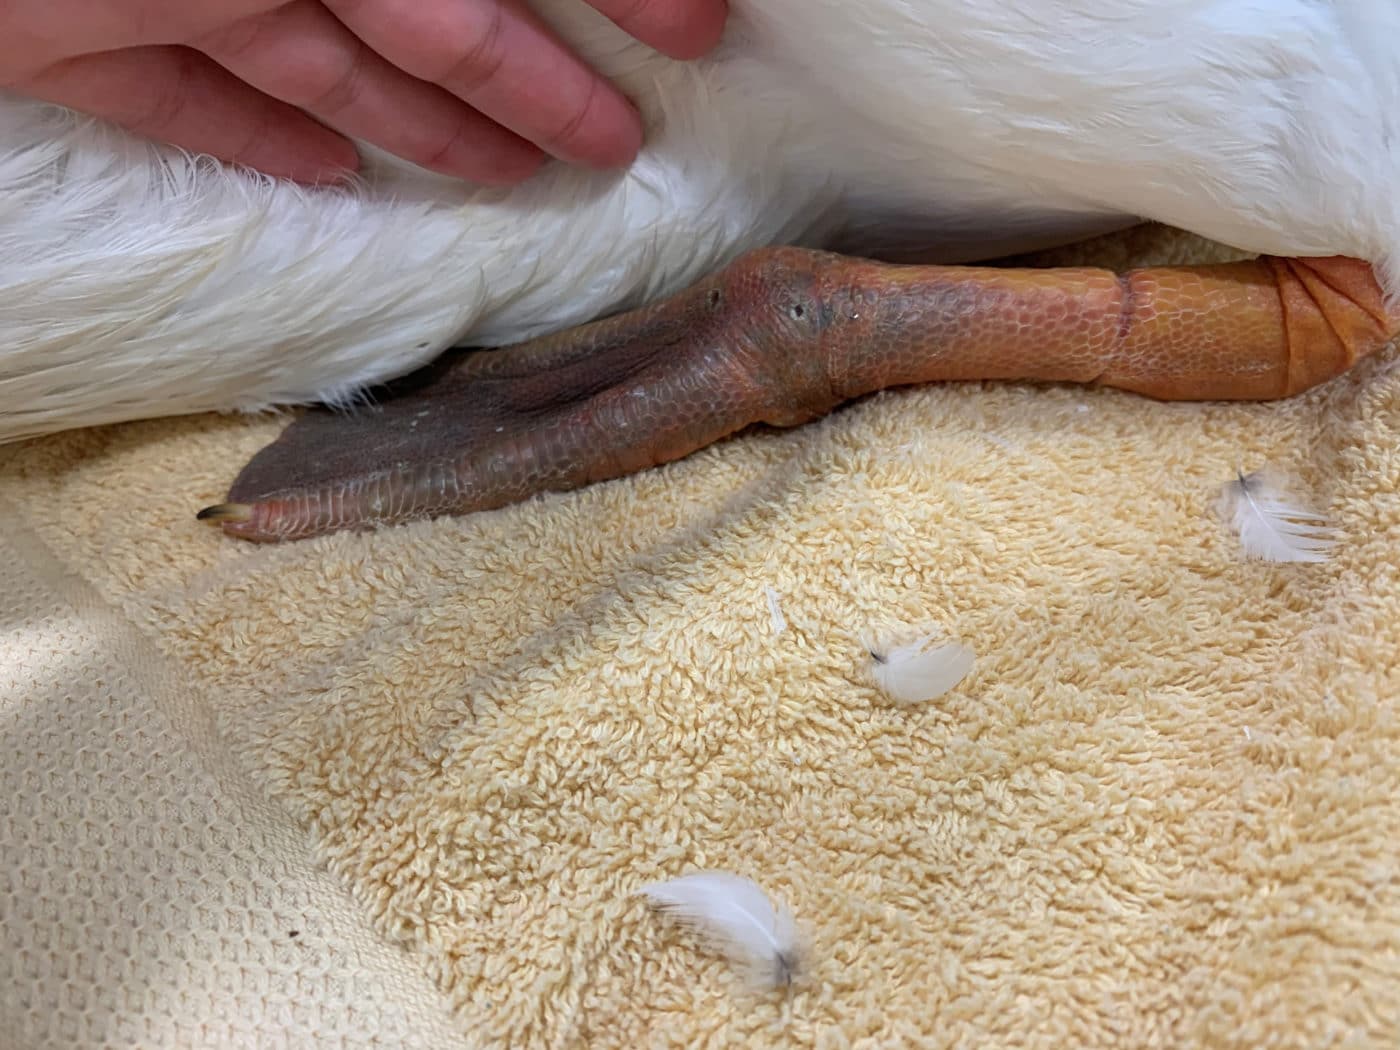 A close-up photo shows swelling, discoloration and the demarcation line caused by monofilament line wrapped tightly around an American white pelican’s leg. The constriction caused loss of circulation to the lower leg and foot.